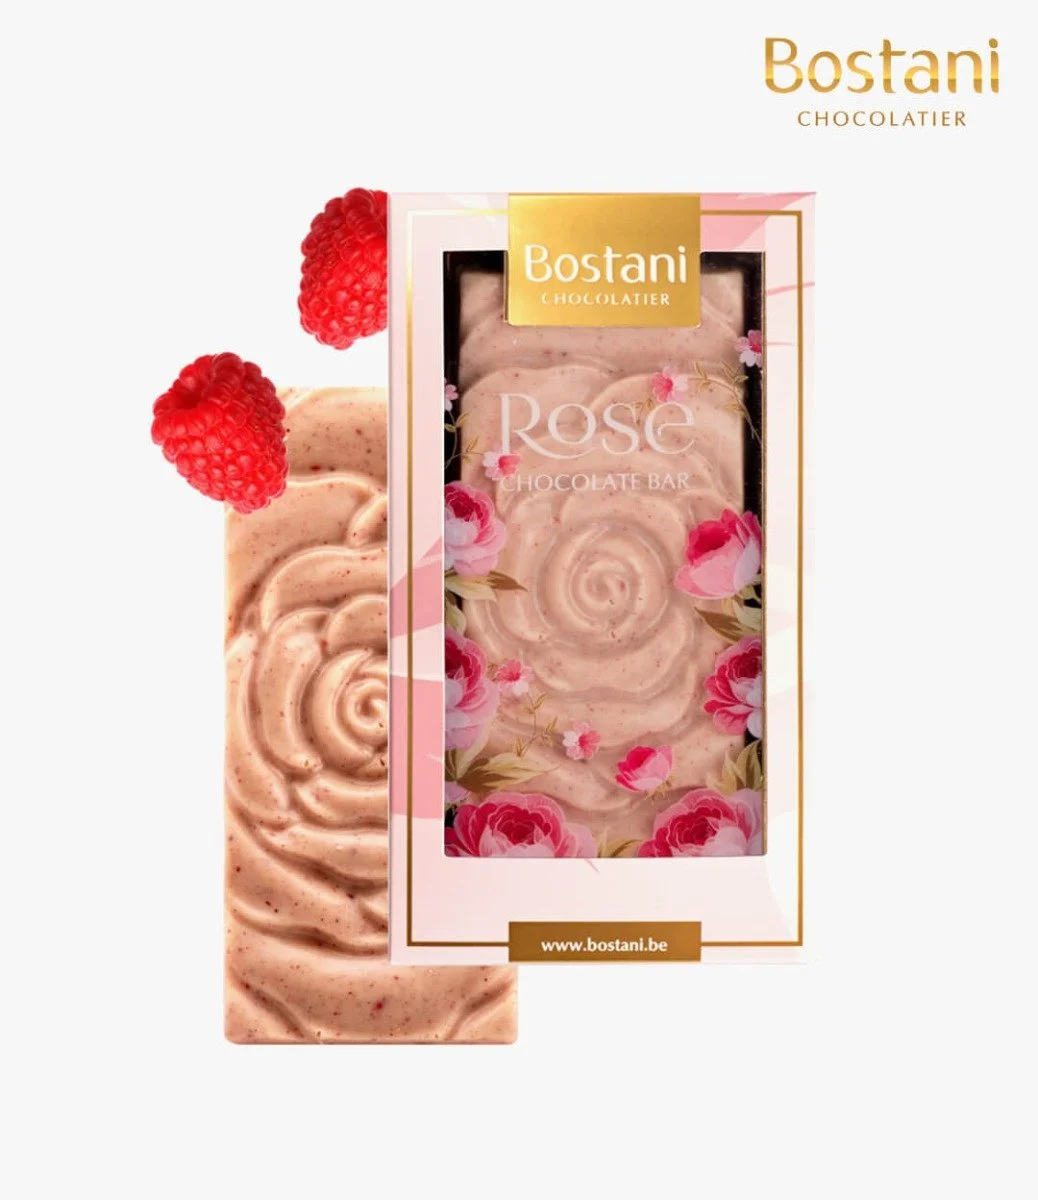 Small Rose Chocolate Bar with Raspberry